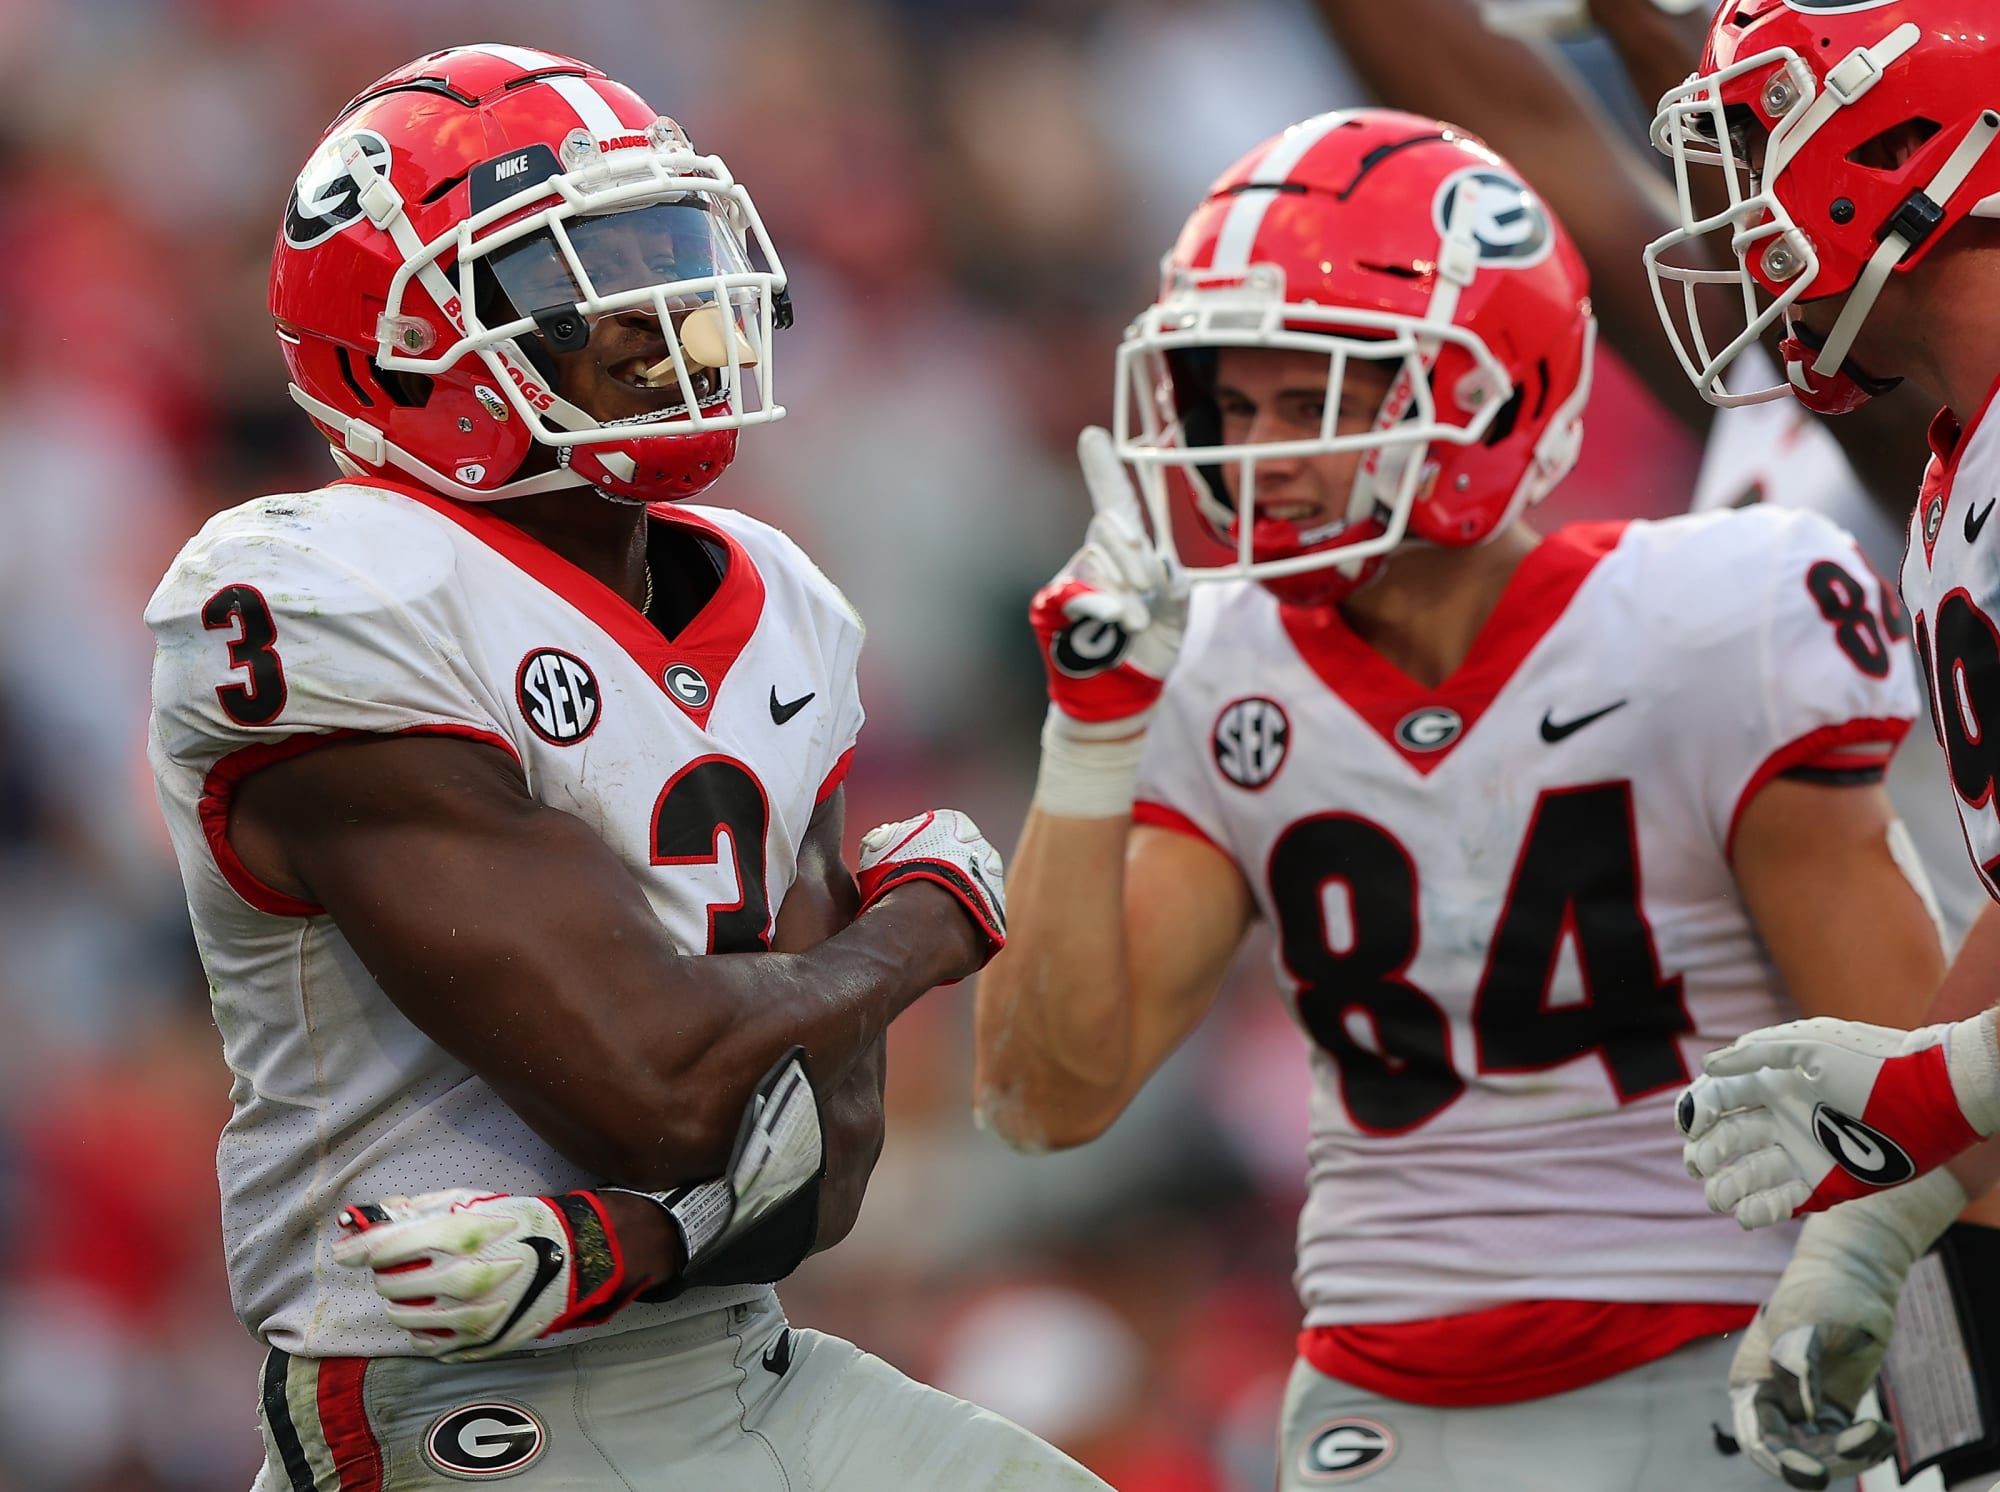 football Strength of schedule works in Dawgs' favor